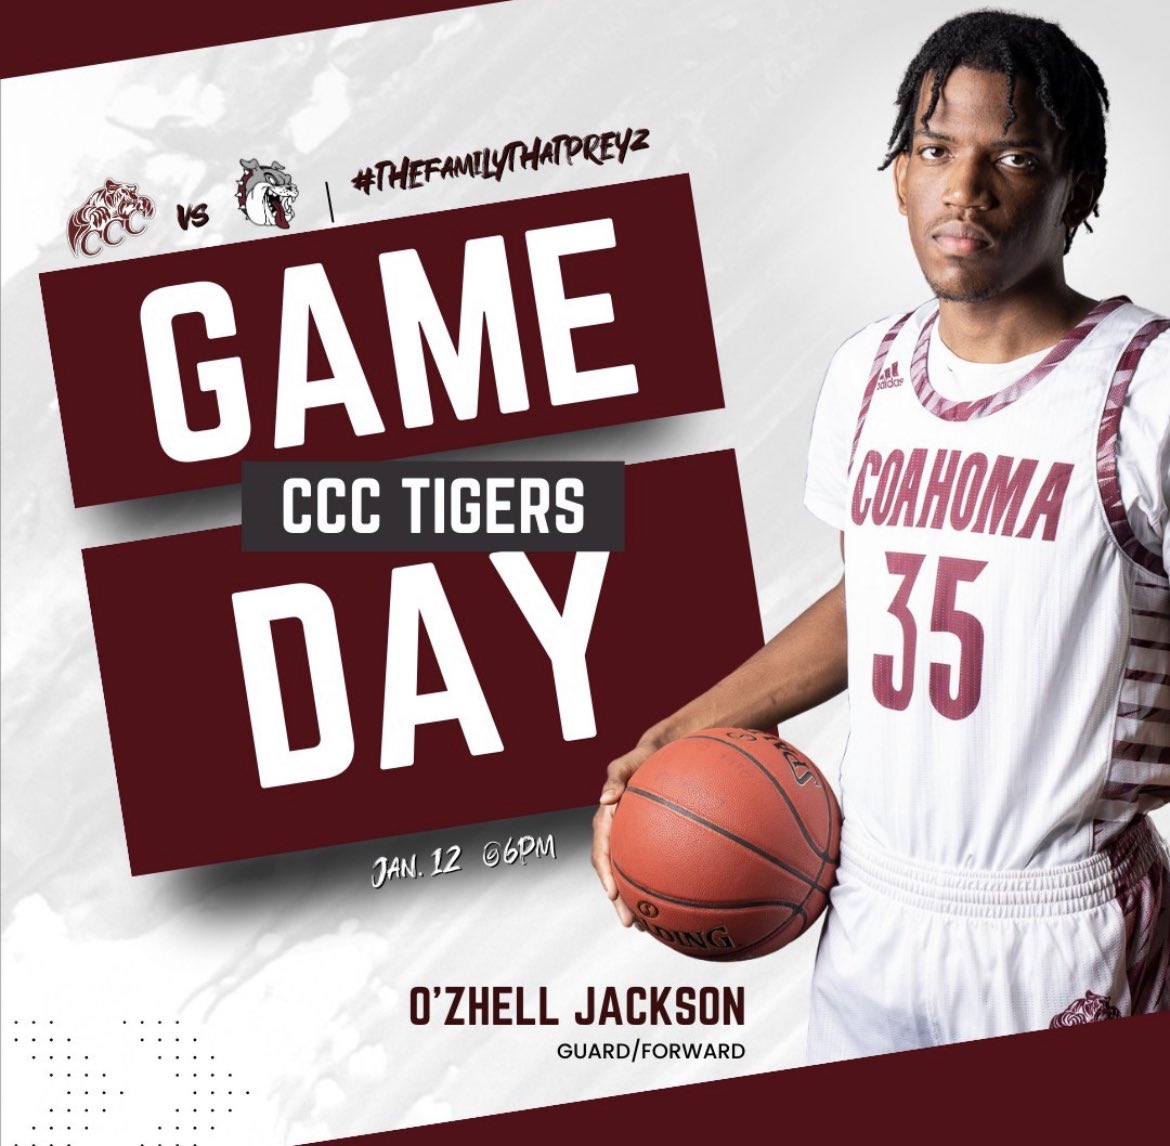 The CCC men's basketball 🏀 team hosts Hinds tonight in the Tigers' 🐅 first home conference game of the season! The matchup will stream live ➡️ bit.ly/3CgoA9g. #TheFamilyThatPreyz

🆚 Hinds Community College
📅 Thursday, Jan. 12, 2023